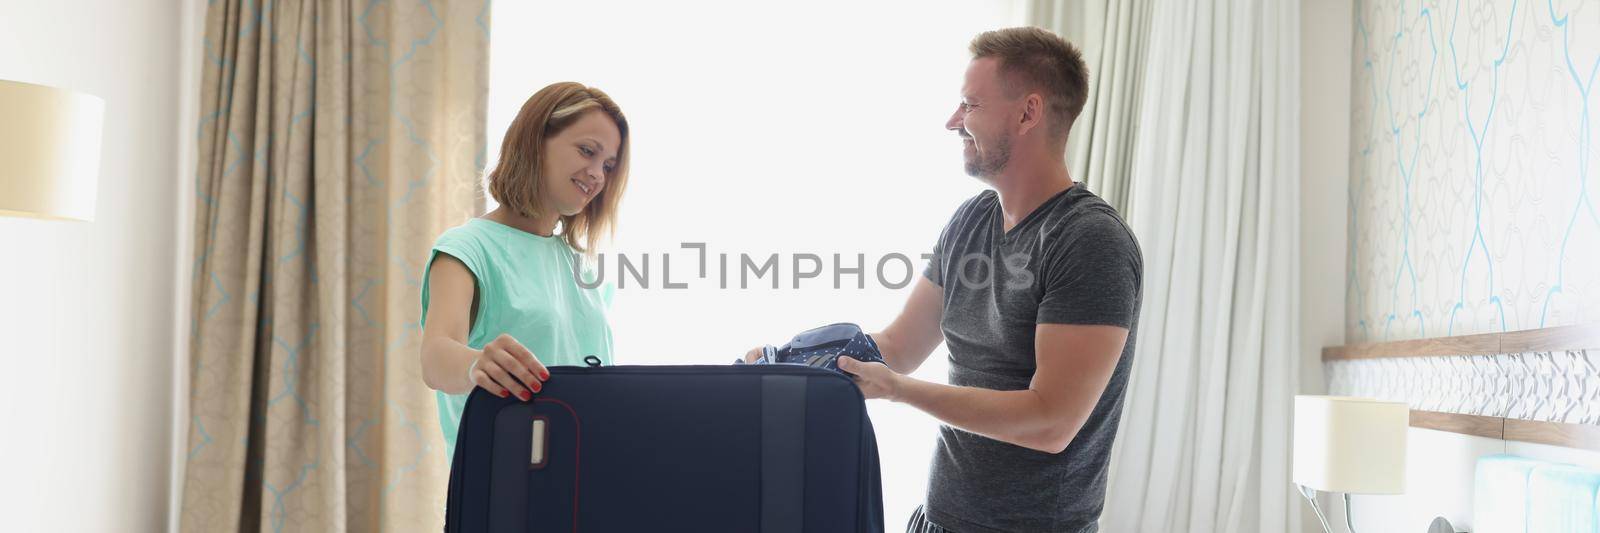 Portrait of woman wife help husband to pack stuff in suitcase for work trip. Woman smile and give advice to man. Work trip, farewell, family time concept